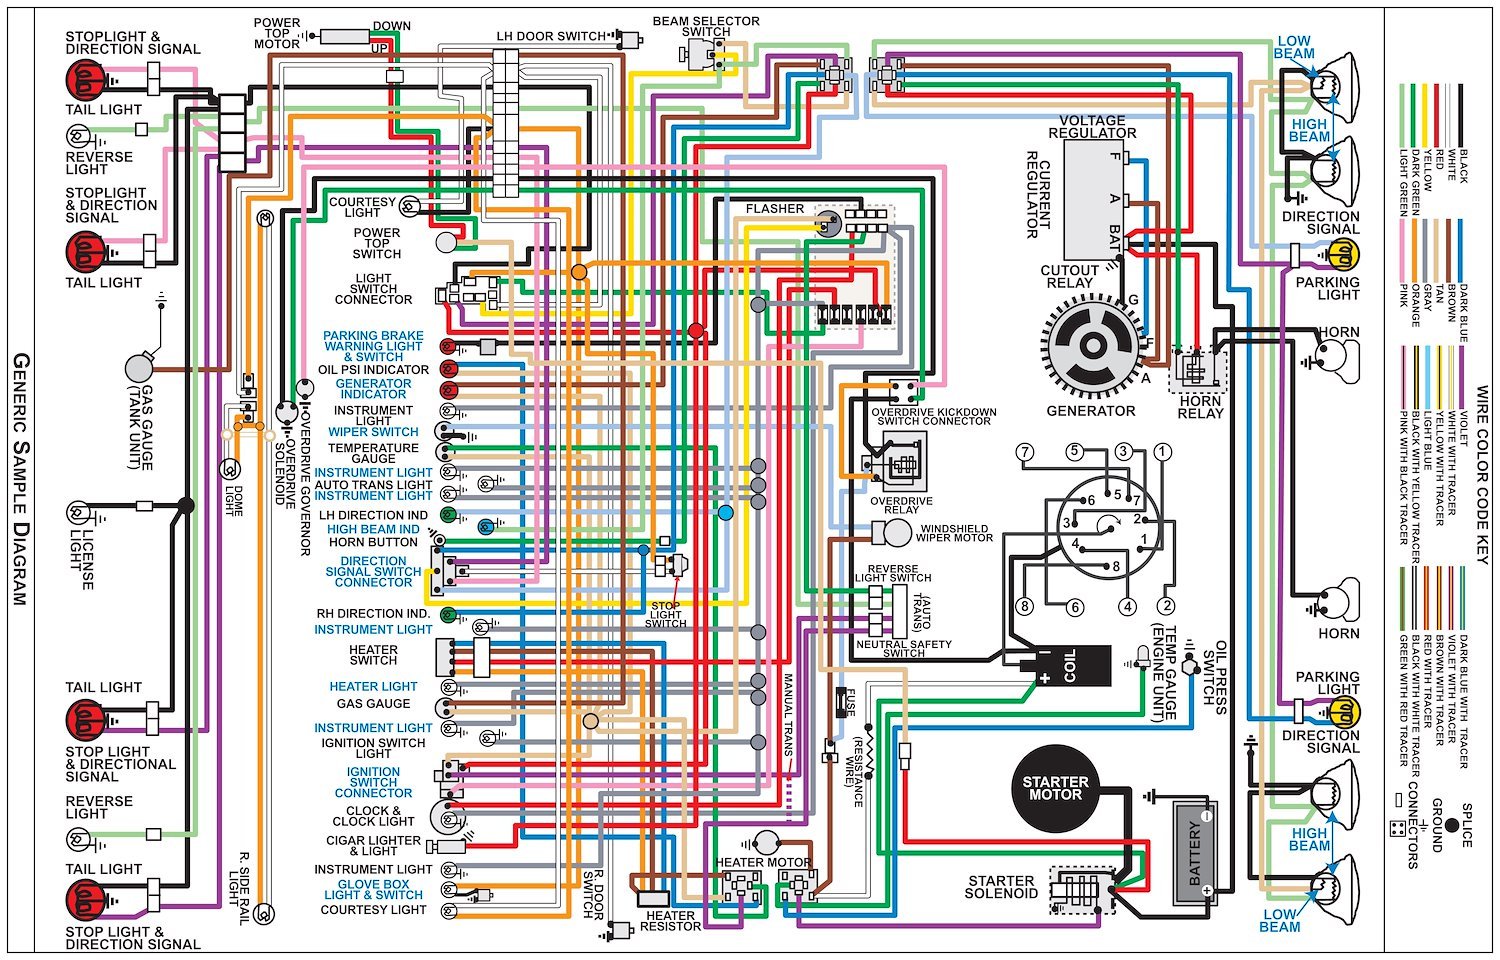 Wiring Diagram for 1970 Dodge Dart & Plymouth Duster with Rallye Dash, 11 in x 17 in., Laminated